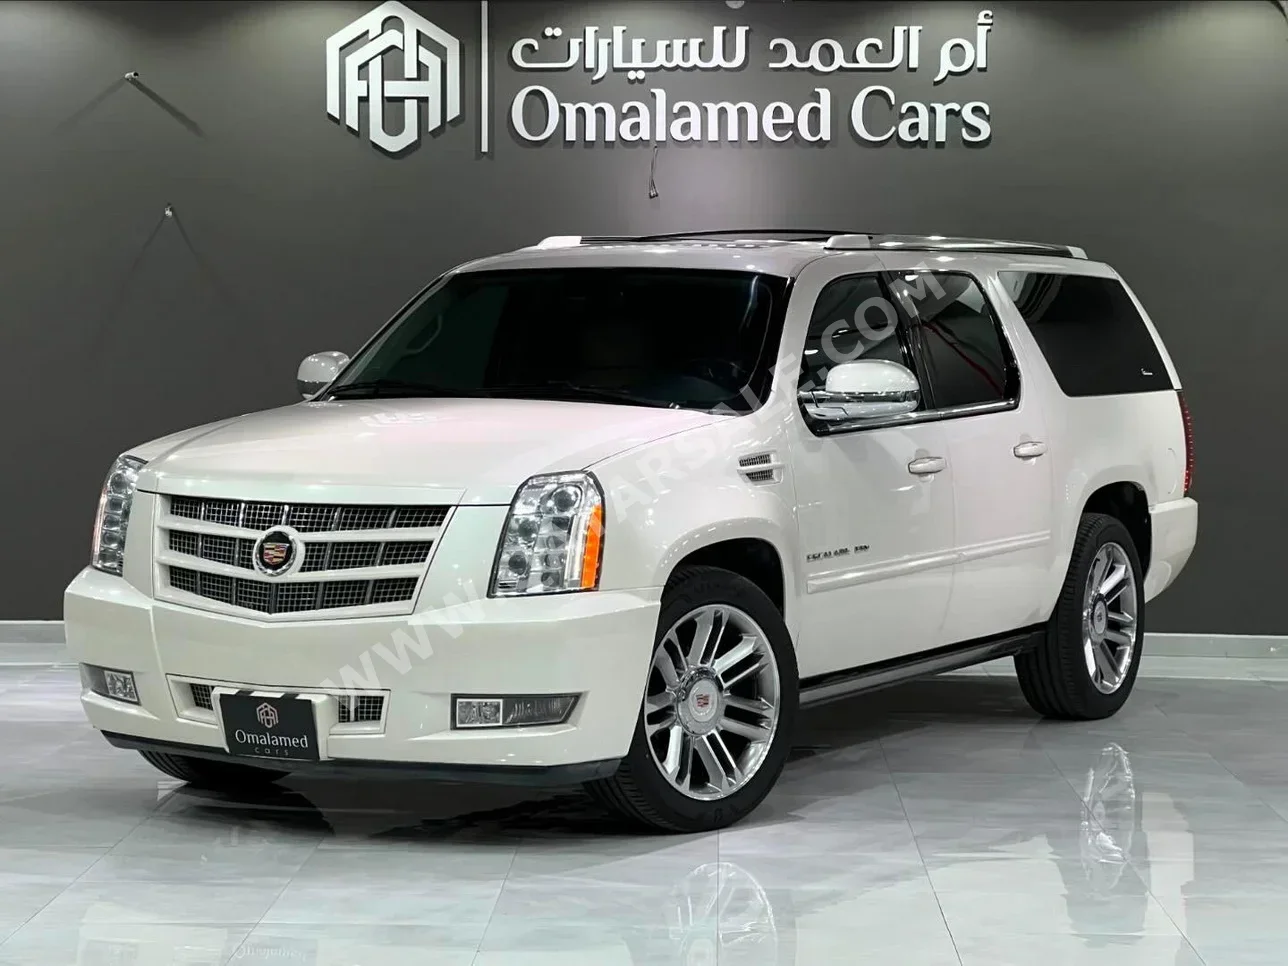 Cadillac  Escalade  2014  Automatic  157,000 Km  8 Cylinder  Four Wheel Drive (4WD)  SUV  White